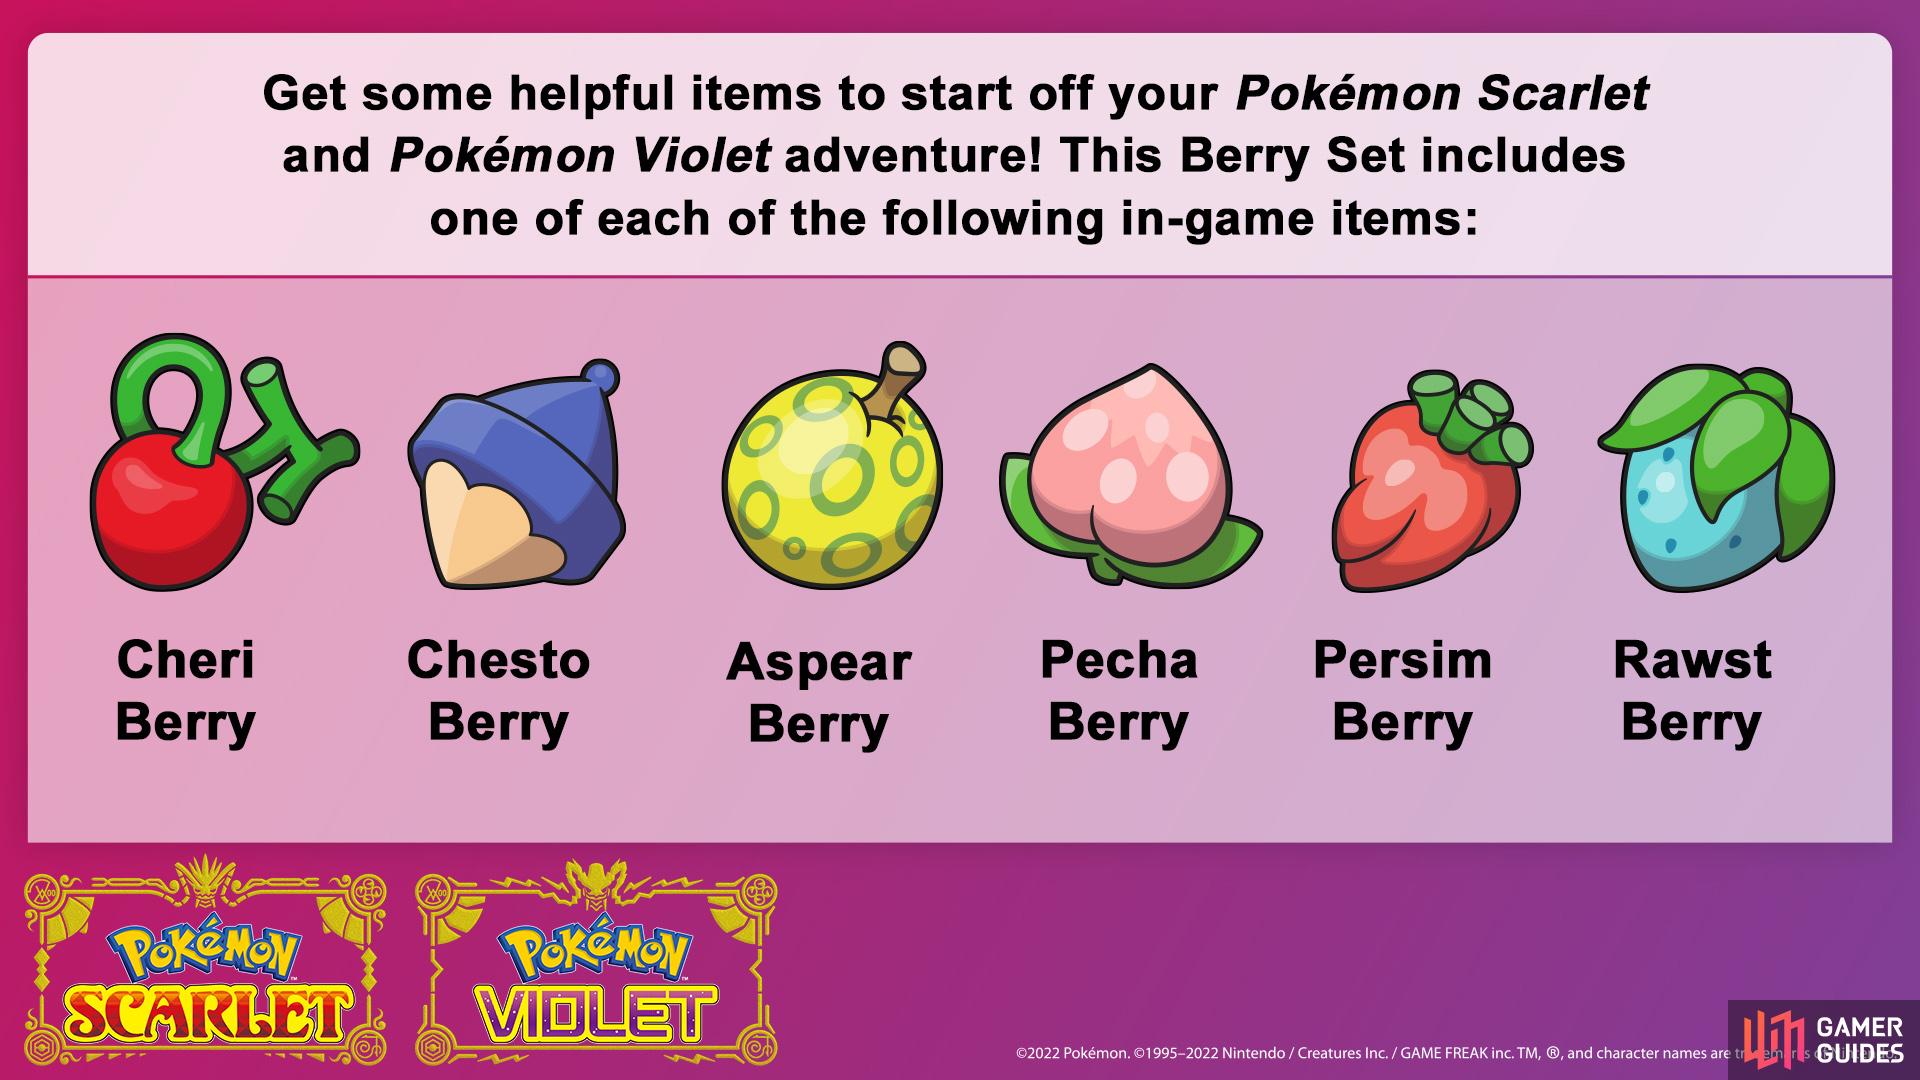 The berries included in the Berry Set. (Credit: The Pokémon Company)